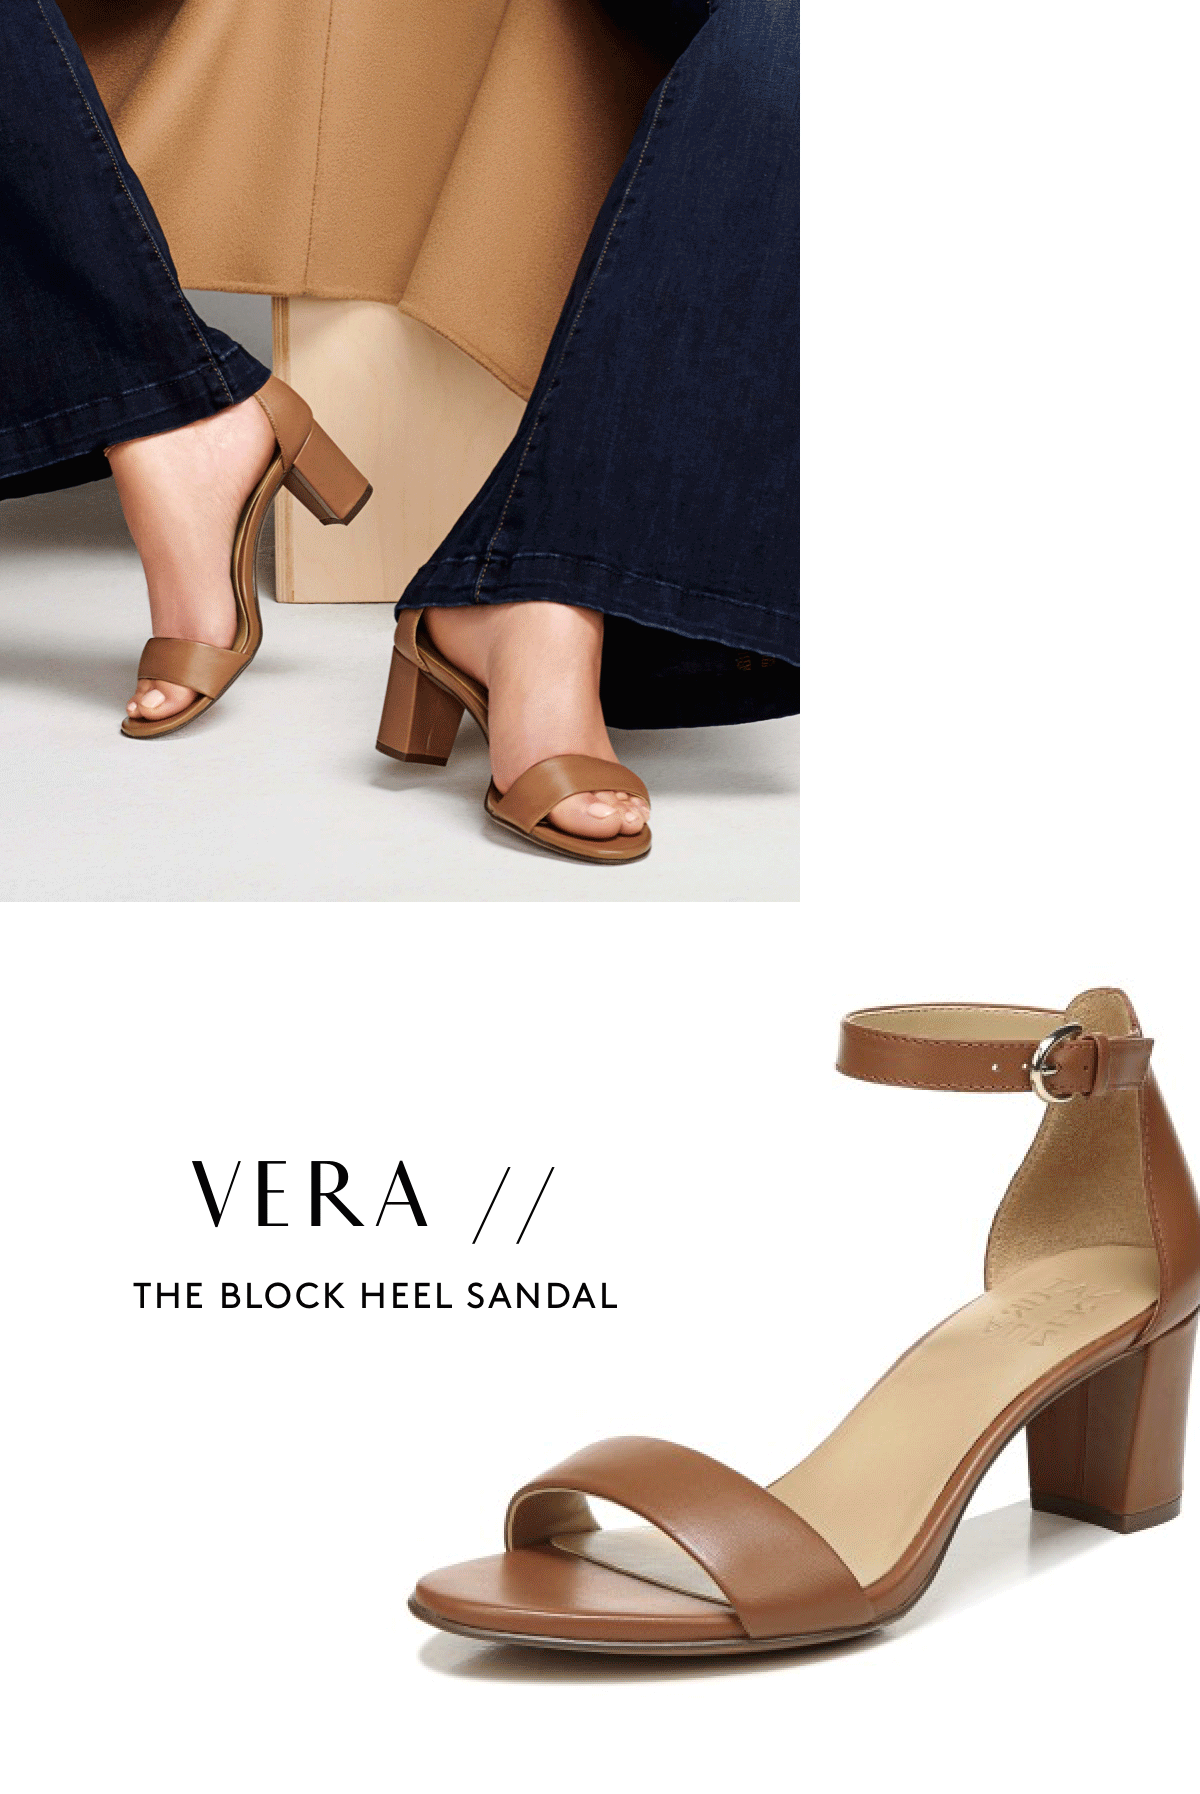 Vera // The Block Heel Sandal Callie // The Lace Up Boot Karina // The Classic Pump Darry // The Lug Sole Loafer Maxwell // The Ballet Flat Morrison // The Modern Sneaker